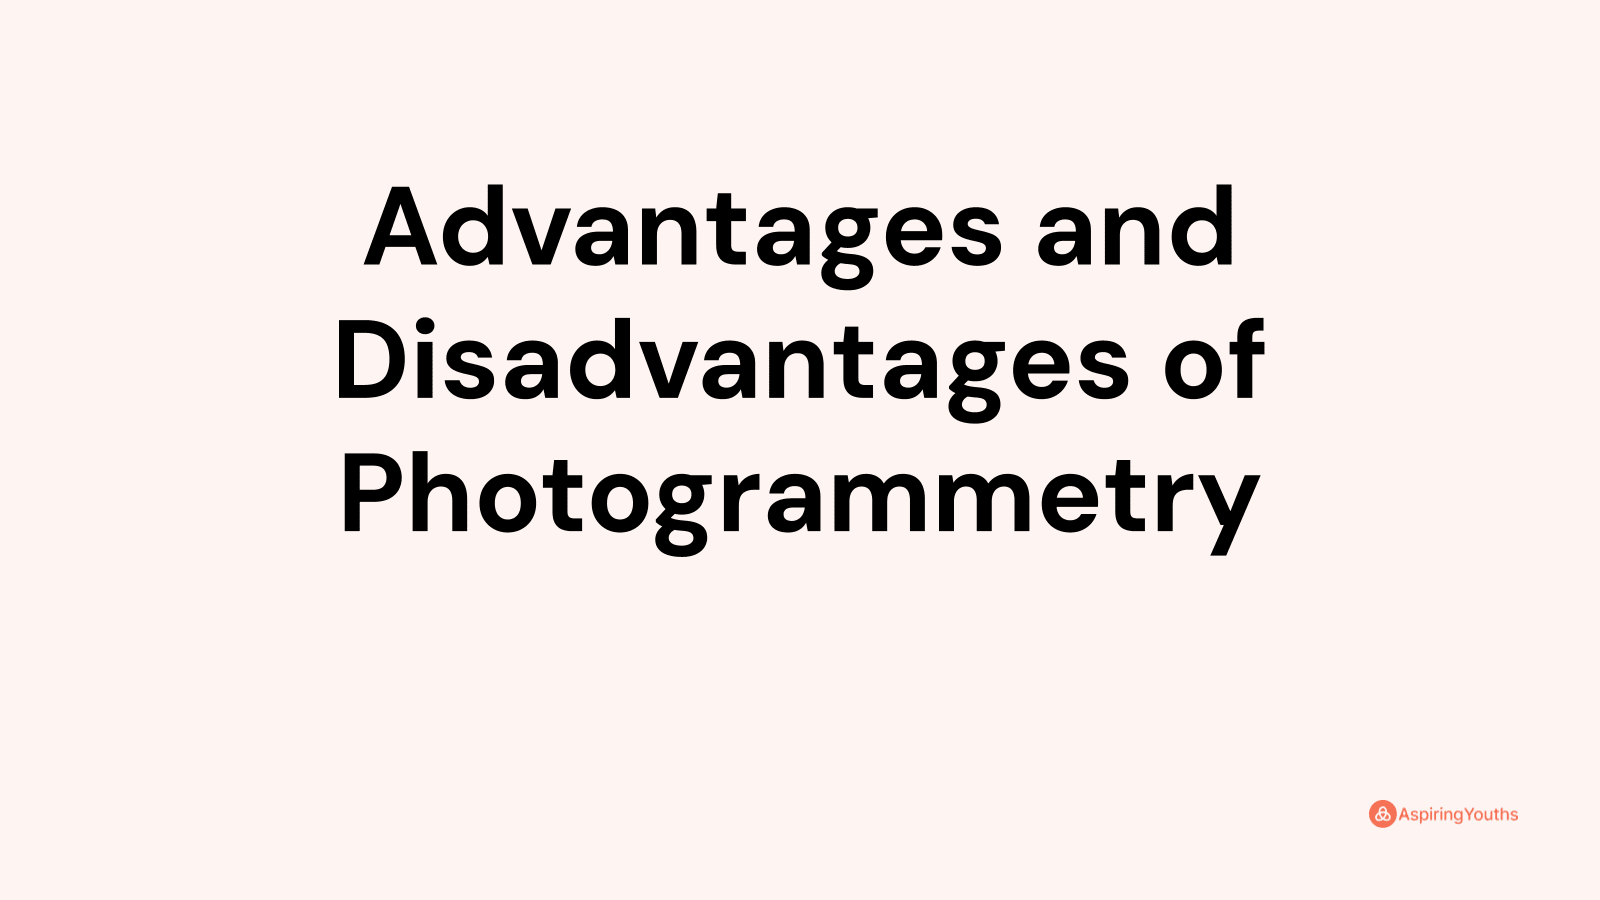 Advantages and disadvantages of Photogrammetry